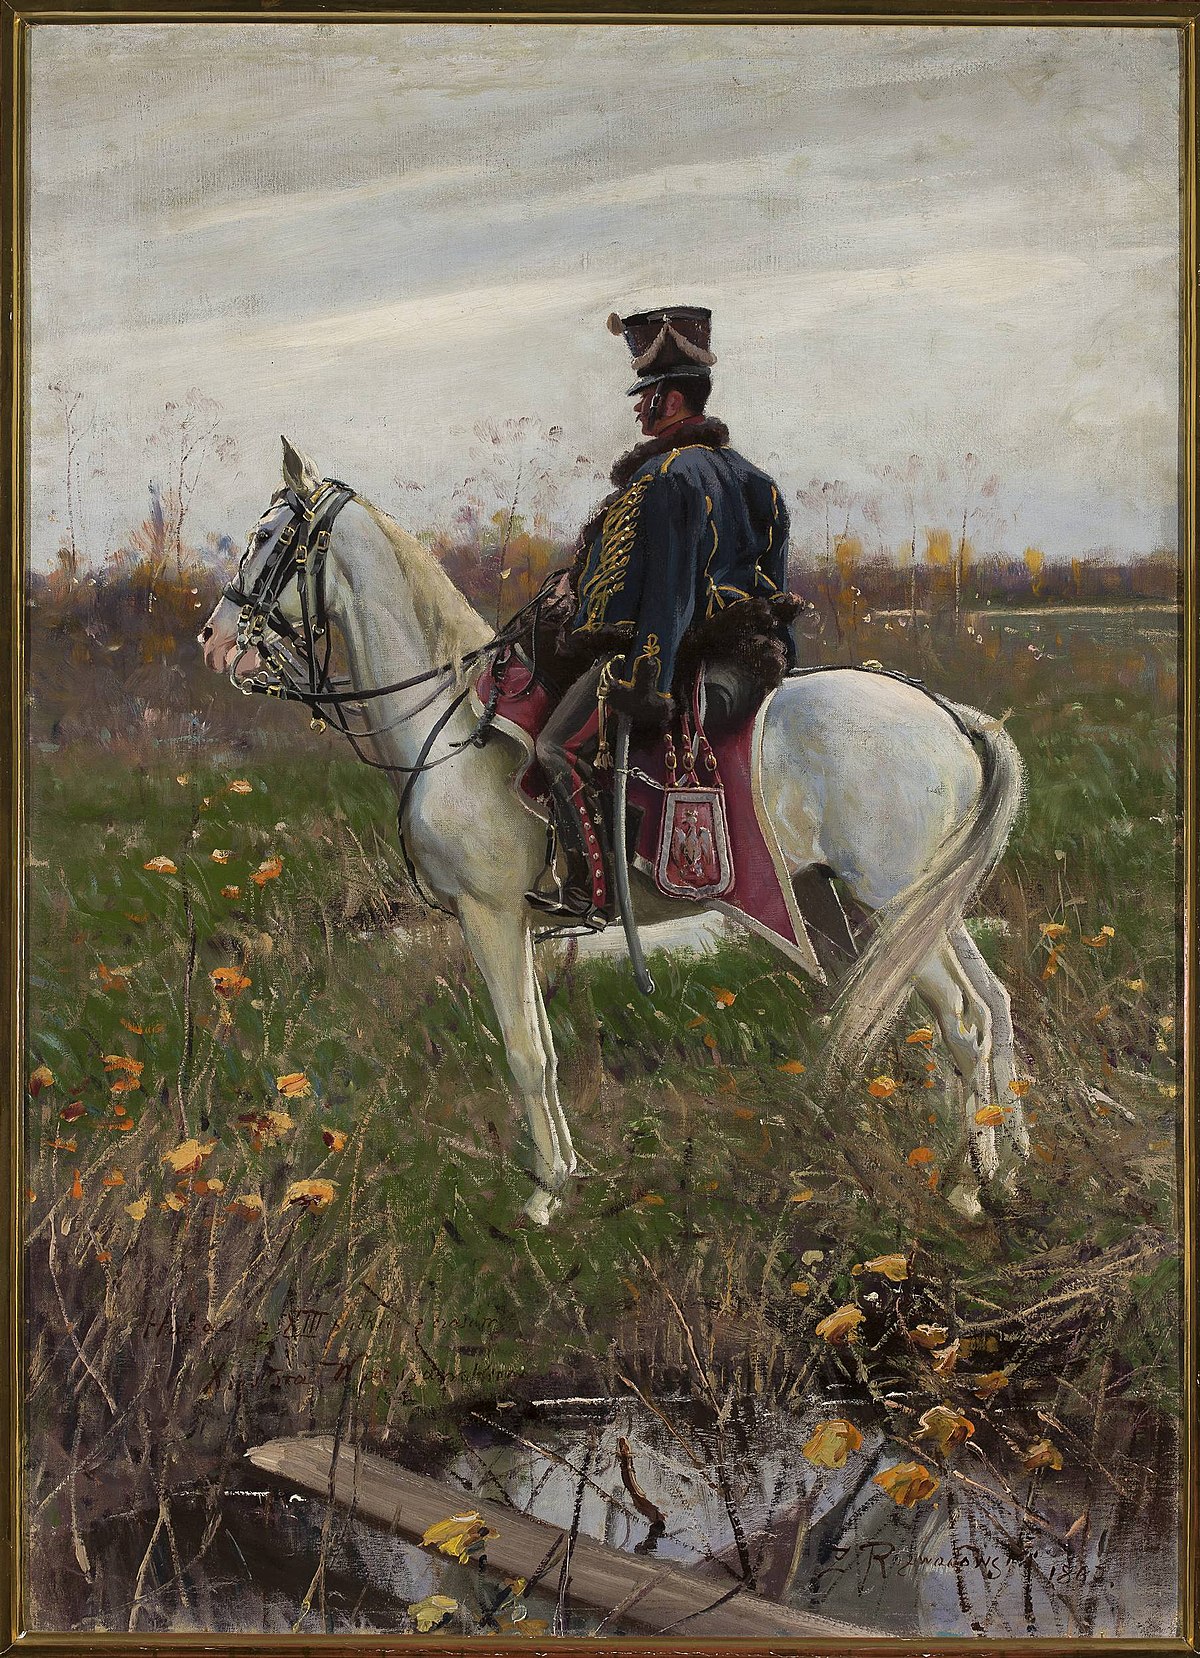 zygmunt_rozwadowski_hussar_from_the_13th_regiment_of_the_army_of_the_duchy_of_warsaw_184933_mnw_national_museum_in_warsaw.jpg